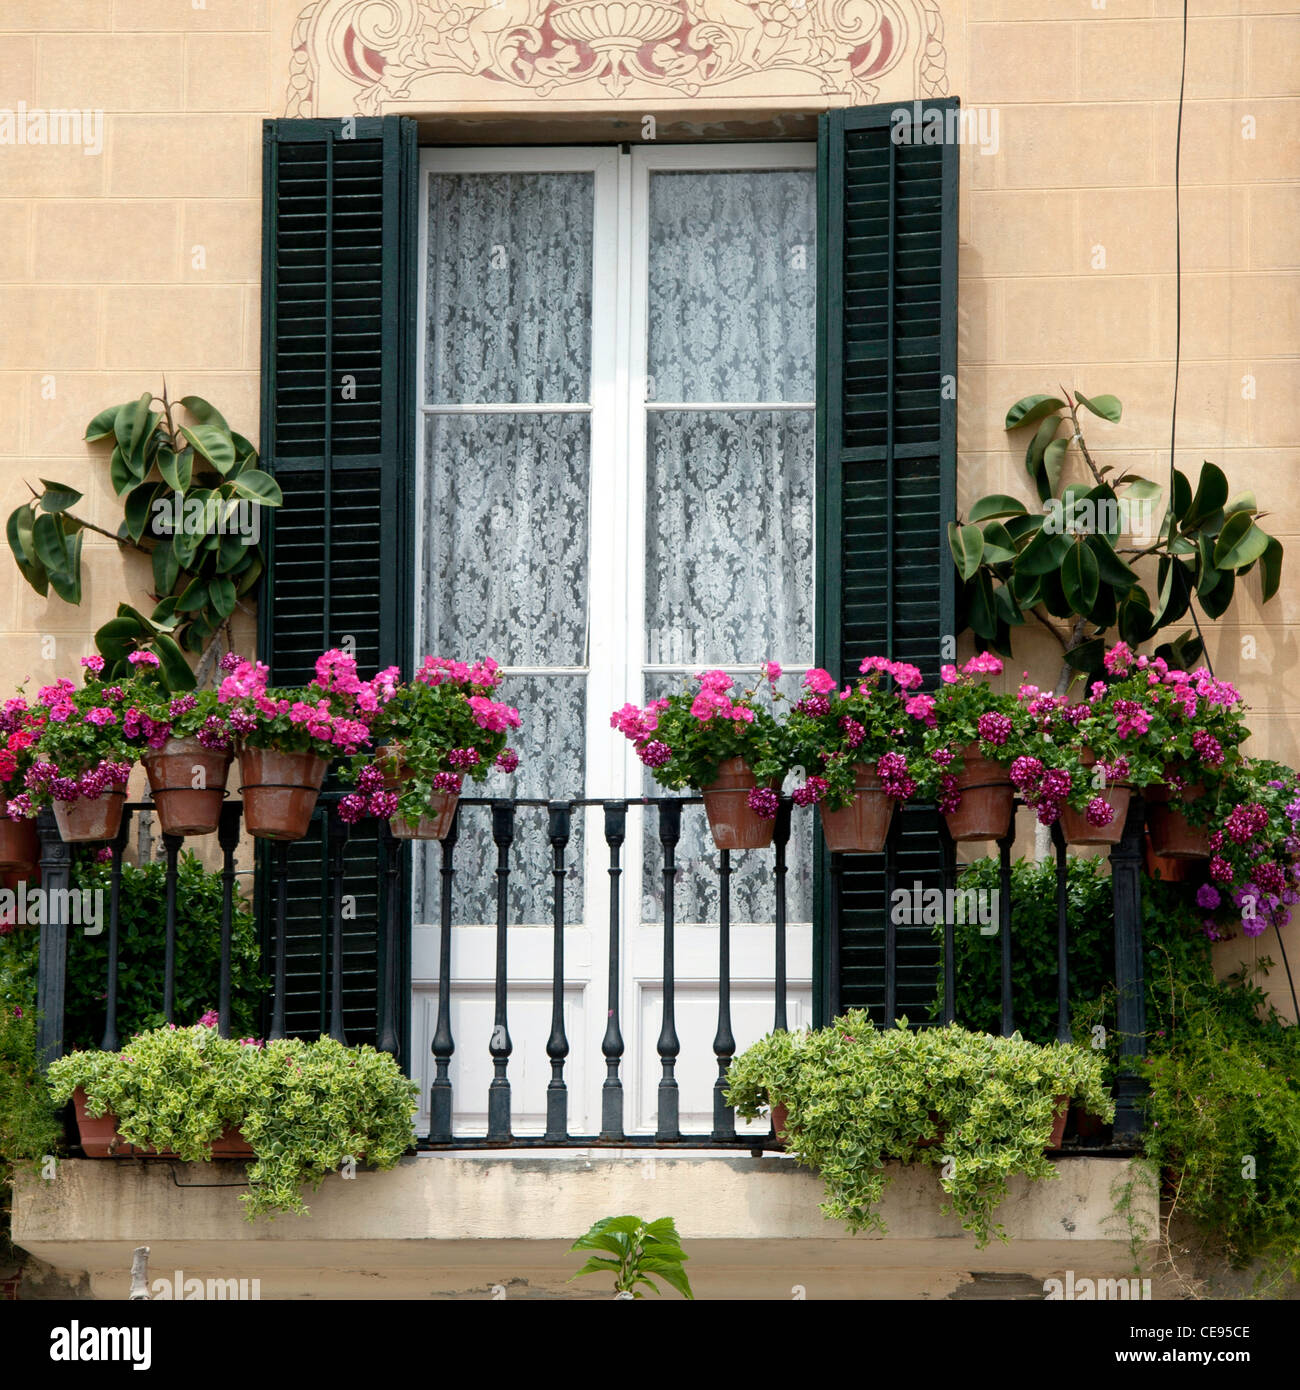 Decorative window with shutters and window boxes in Sitges Spain Stock Photo